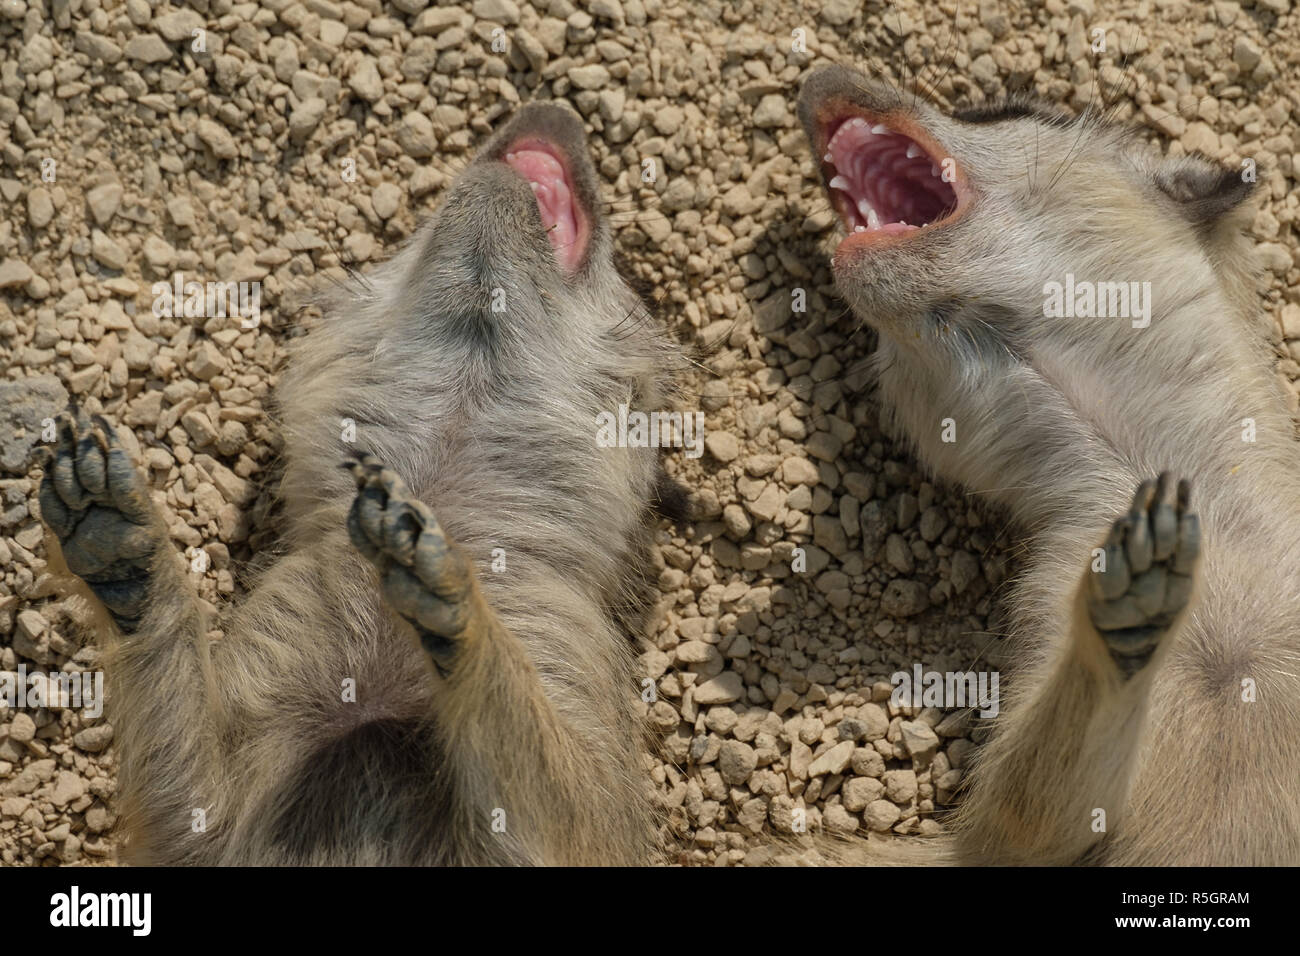 meerkats children with paws and claws show their teeth Stock Photo